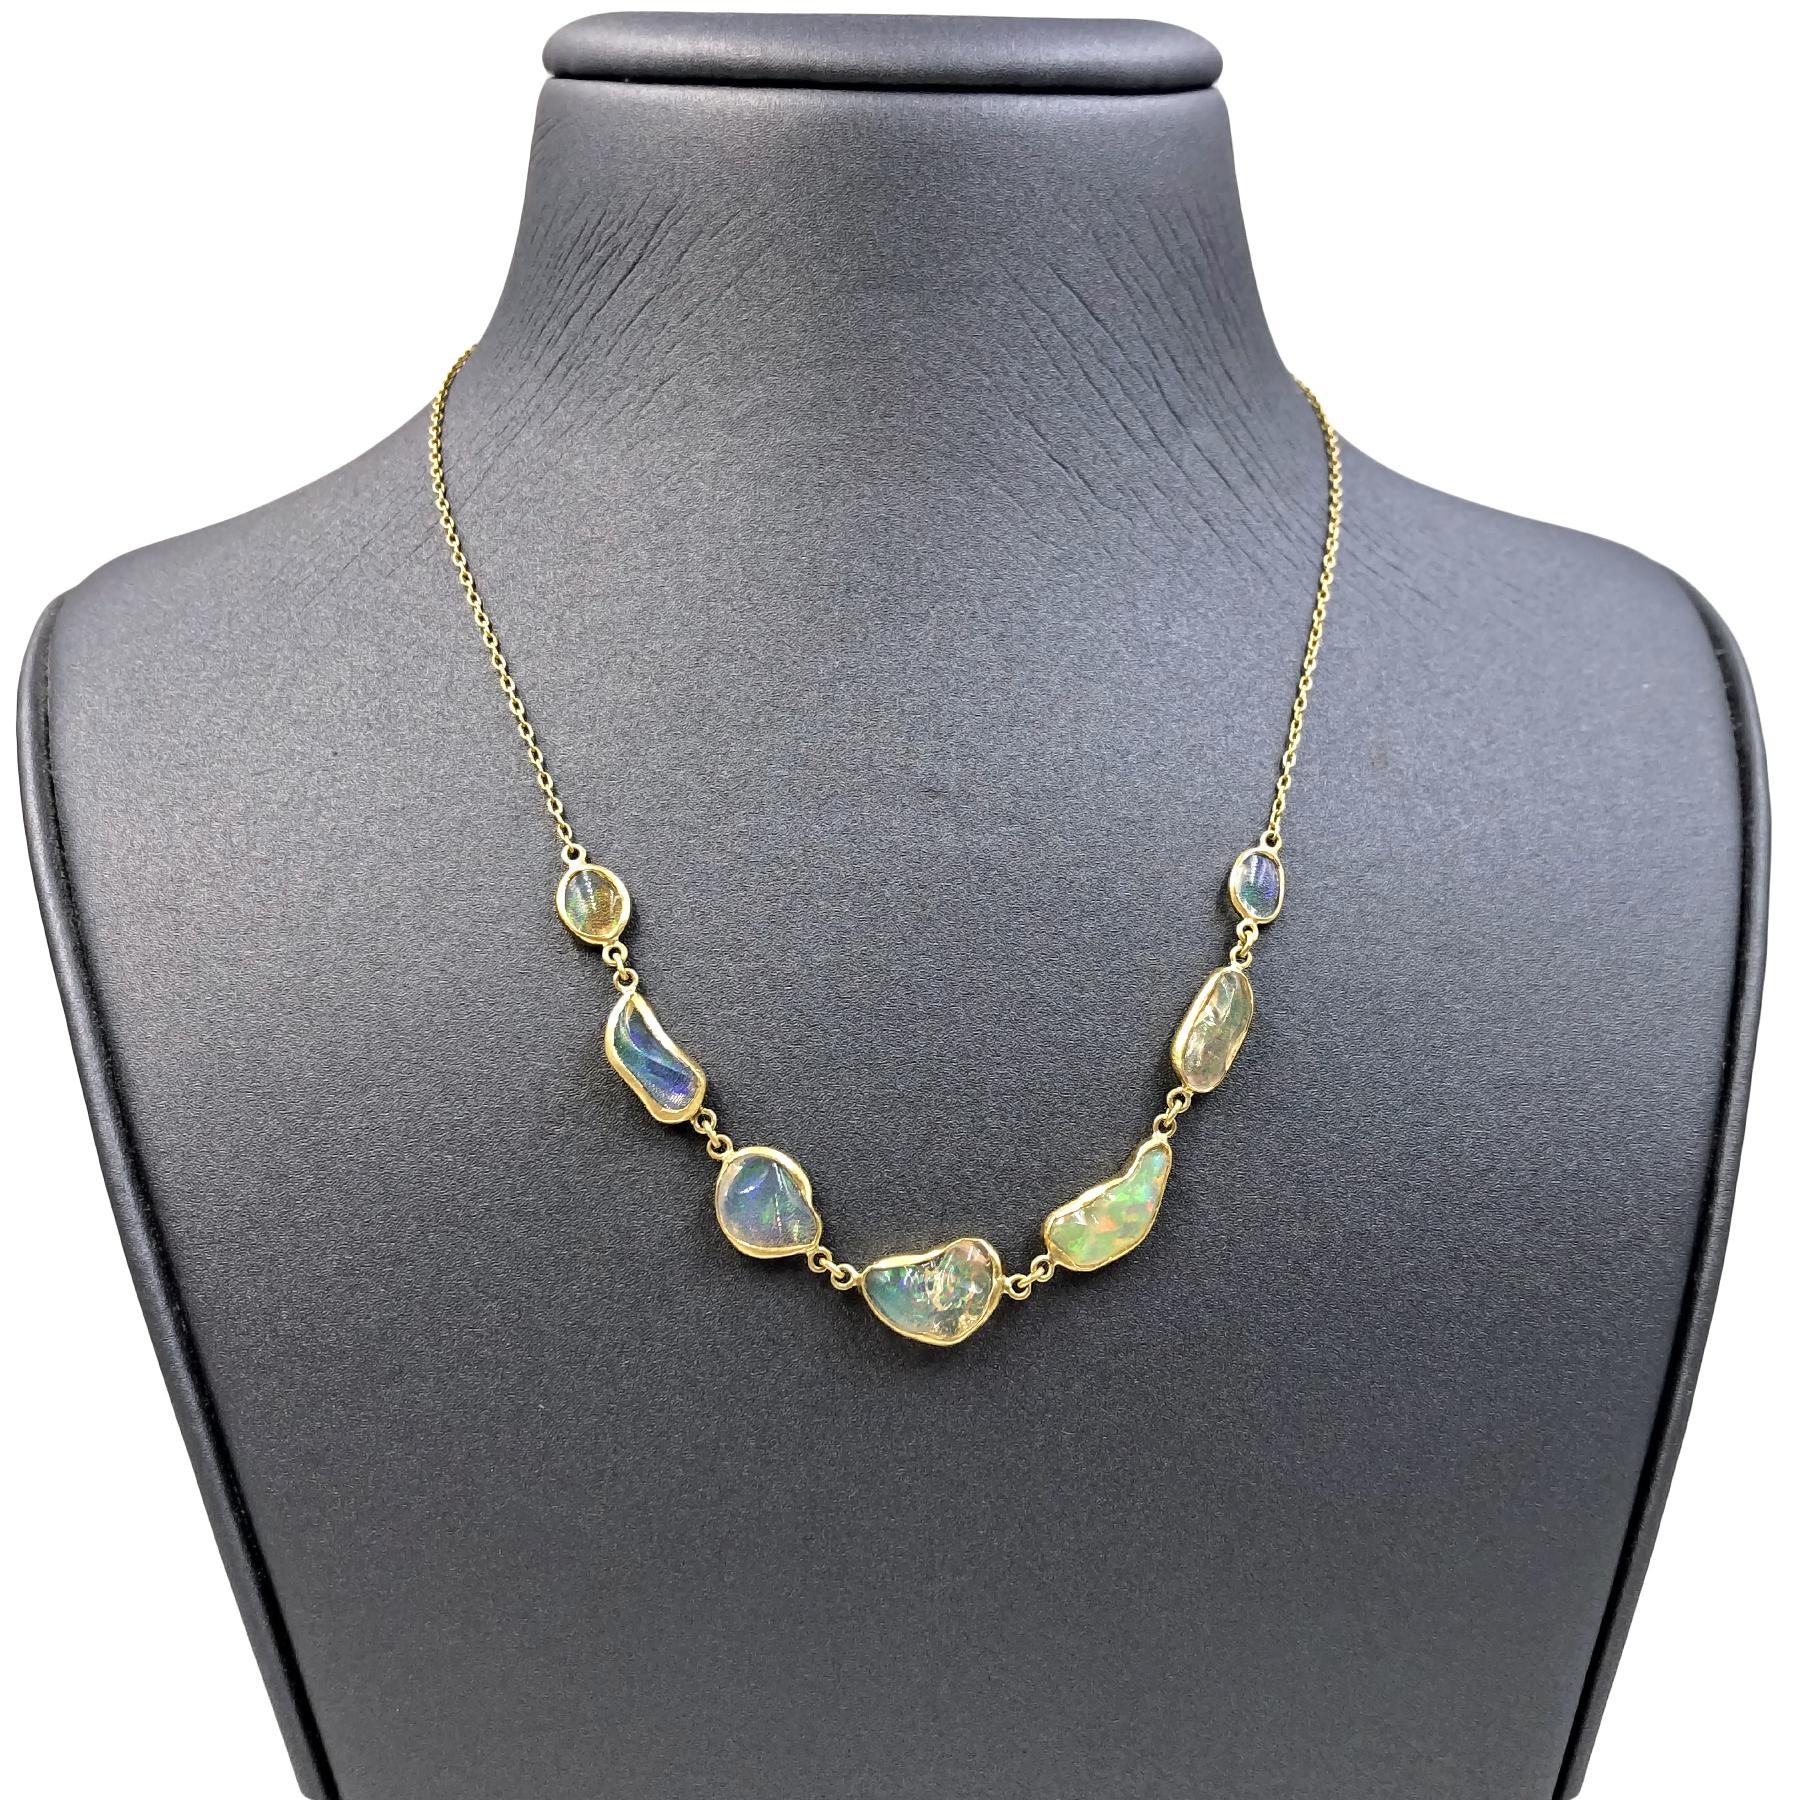 One of a Kind In-Line Necklace handmade by jewelry maker Tej Kothari in matte-finished 18k yellow gold featuring seven freeform Mexican opals with beautiful rainbow fire individually bezel-set and attached to an 18k gold chain, wearable at 16, 17,